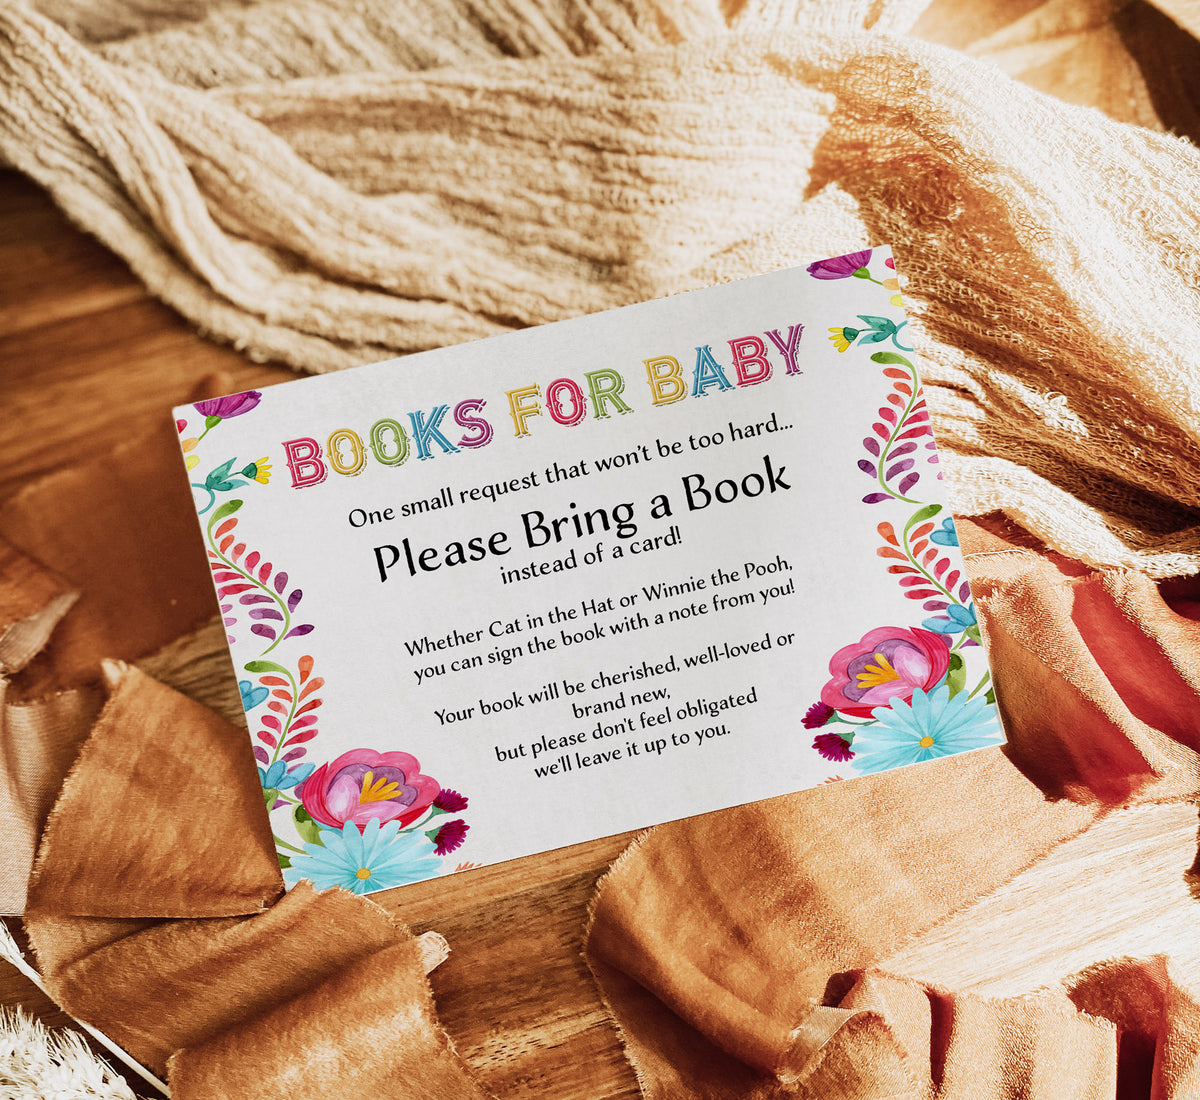 Taco About Fiesta Books for Baby - Premium Paper & Party Supplies > Paper > Invitations & Announcements > Invitations from Sugar and Spice Invitations - Just $1.50! Shop now at Sugar and Spice Paper